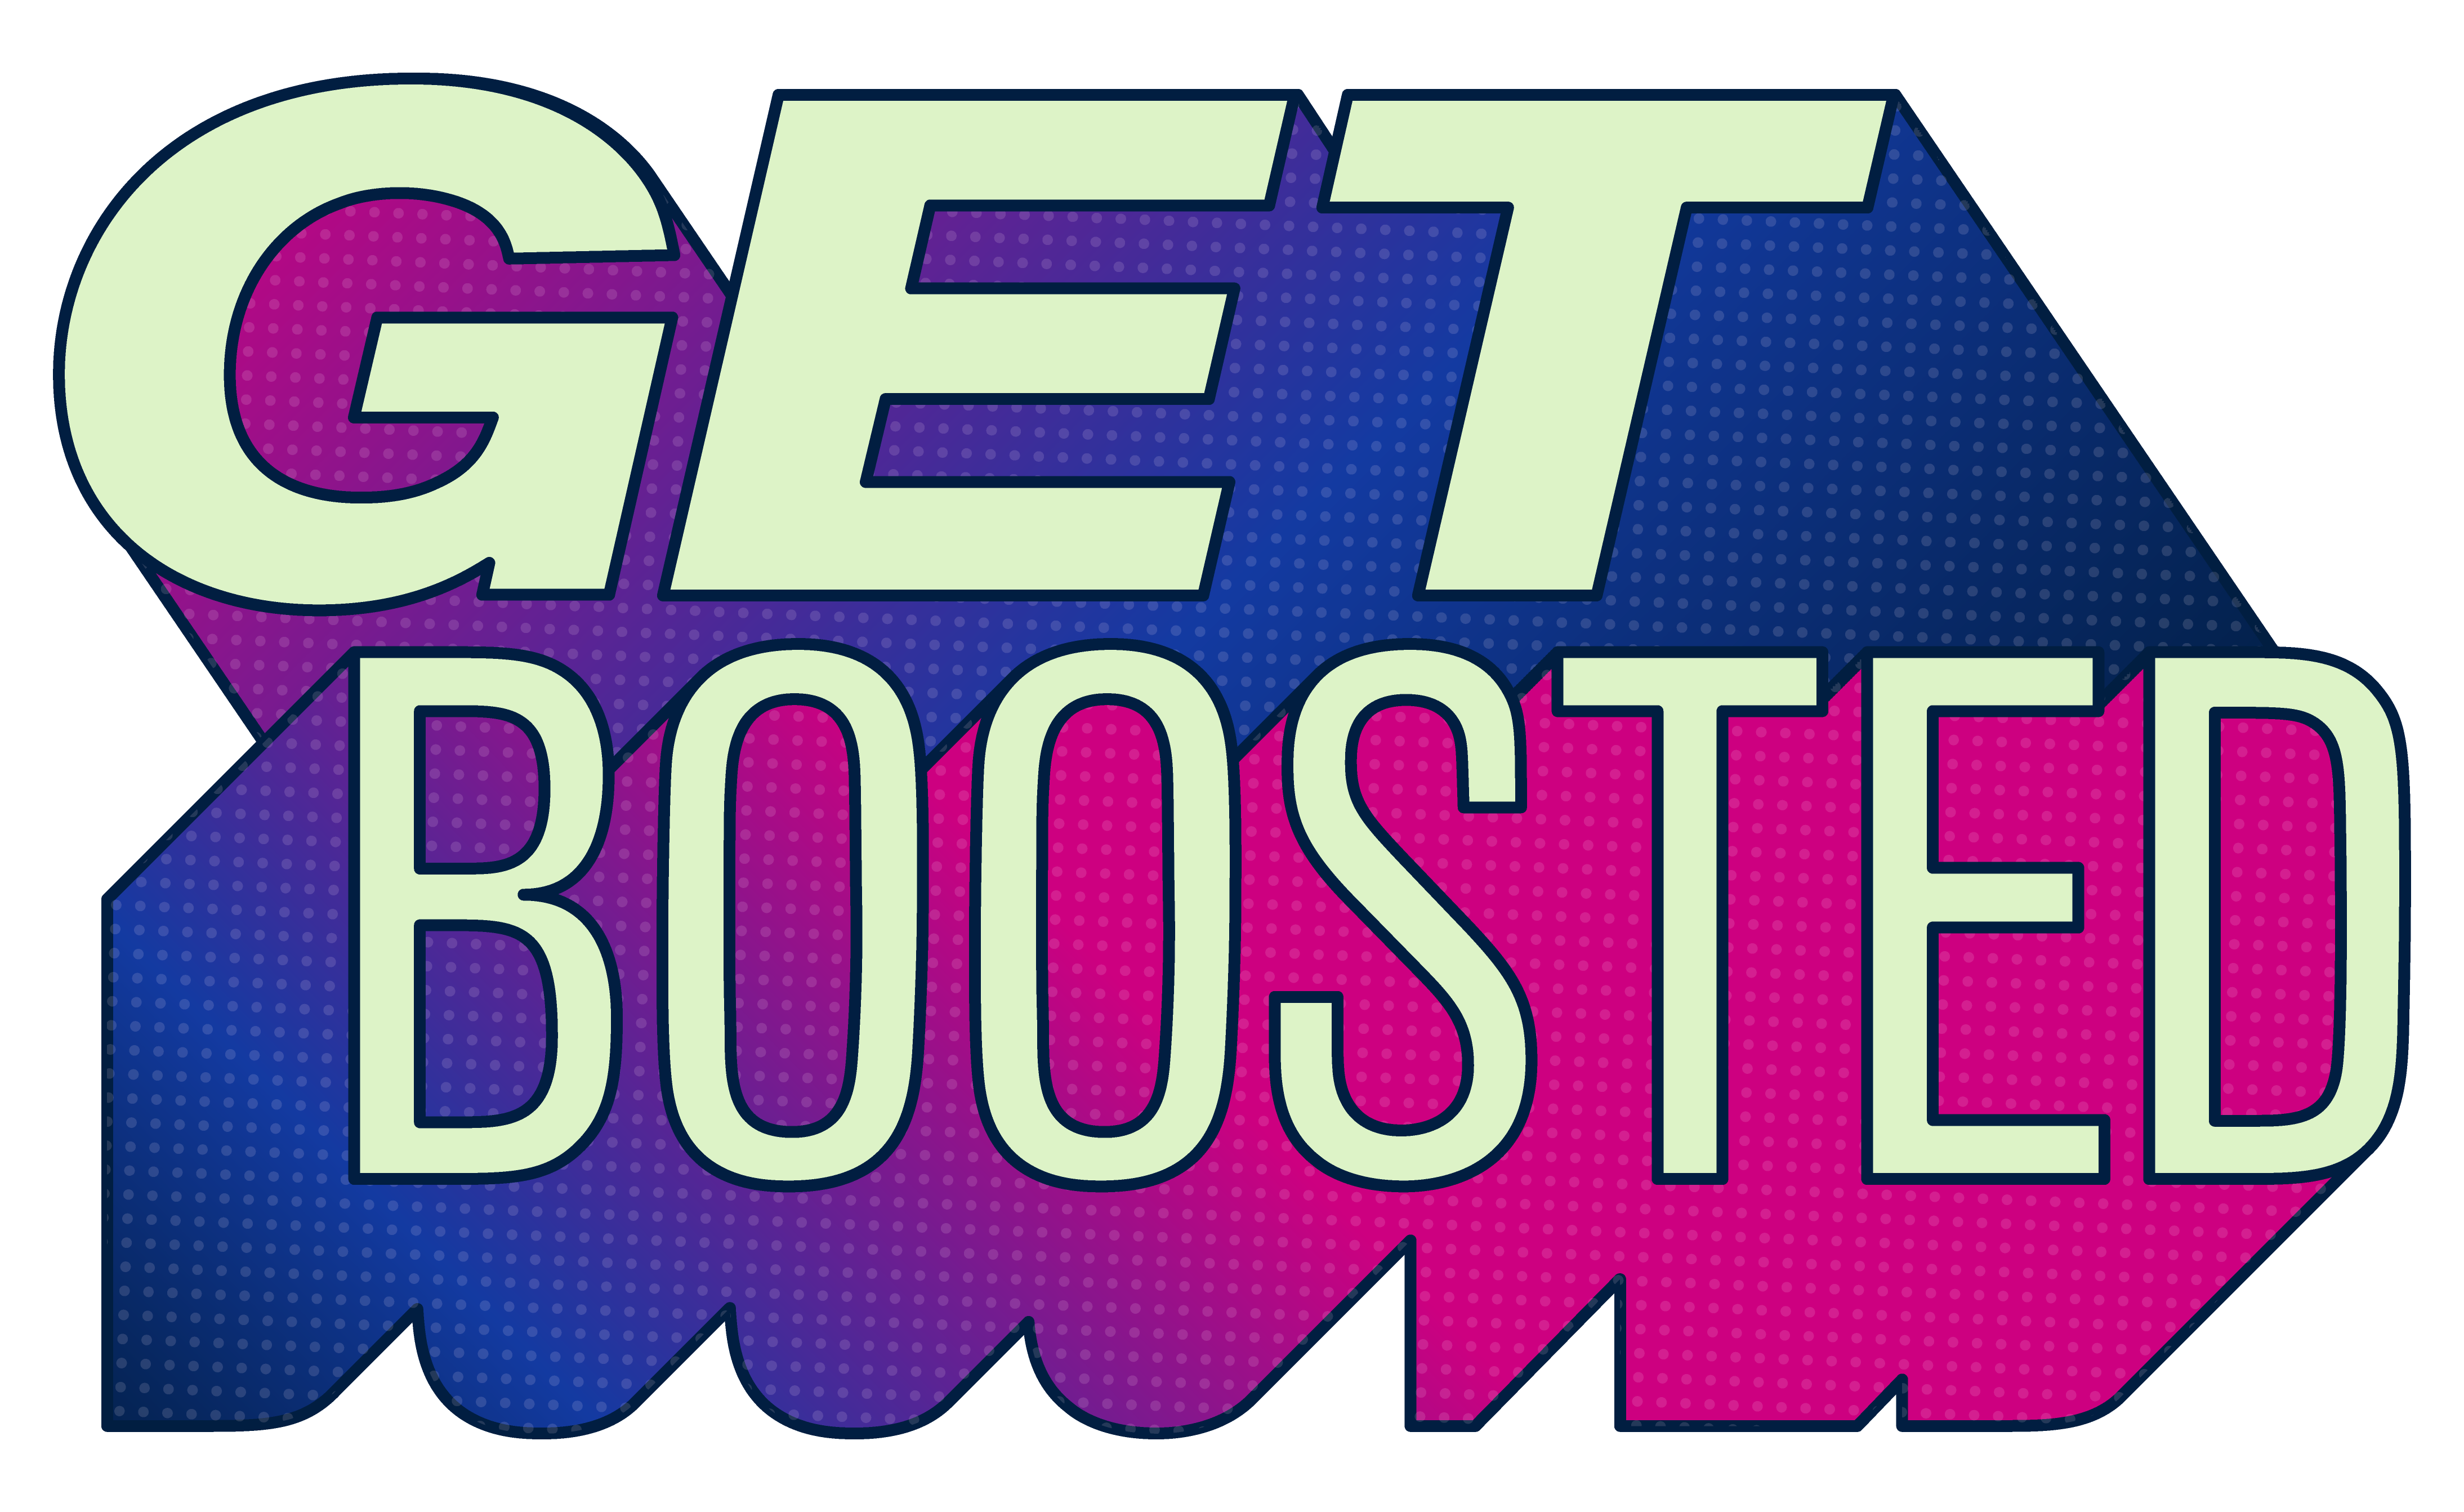 Illustrated, stylized lettering that says "Get boosted"